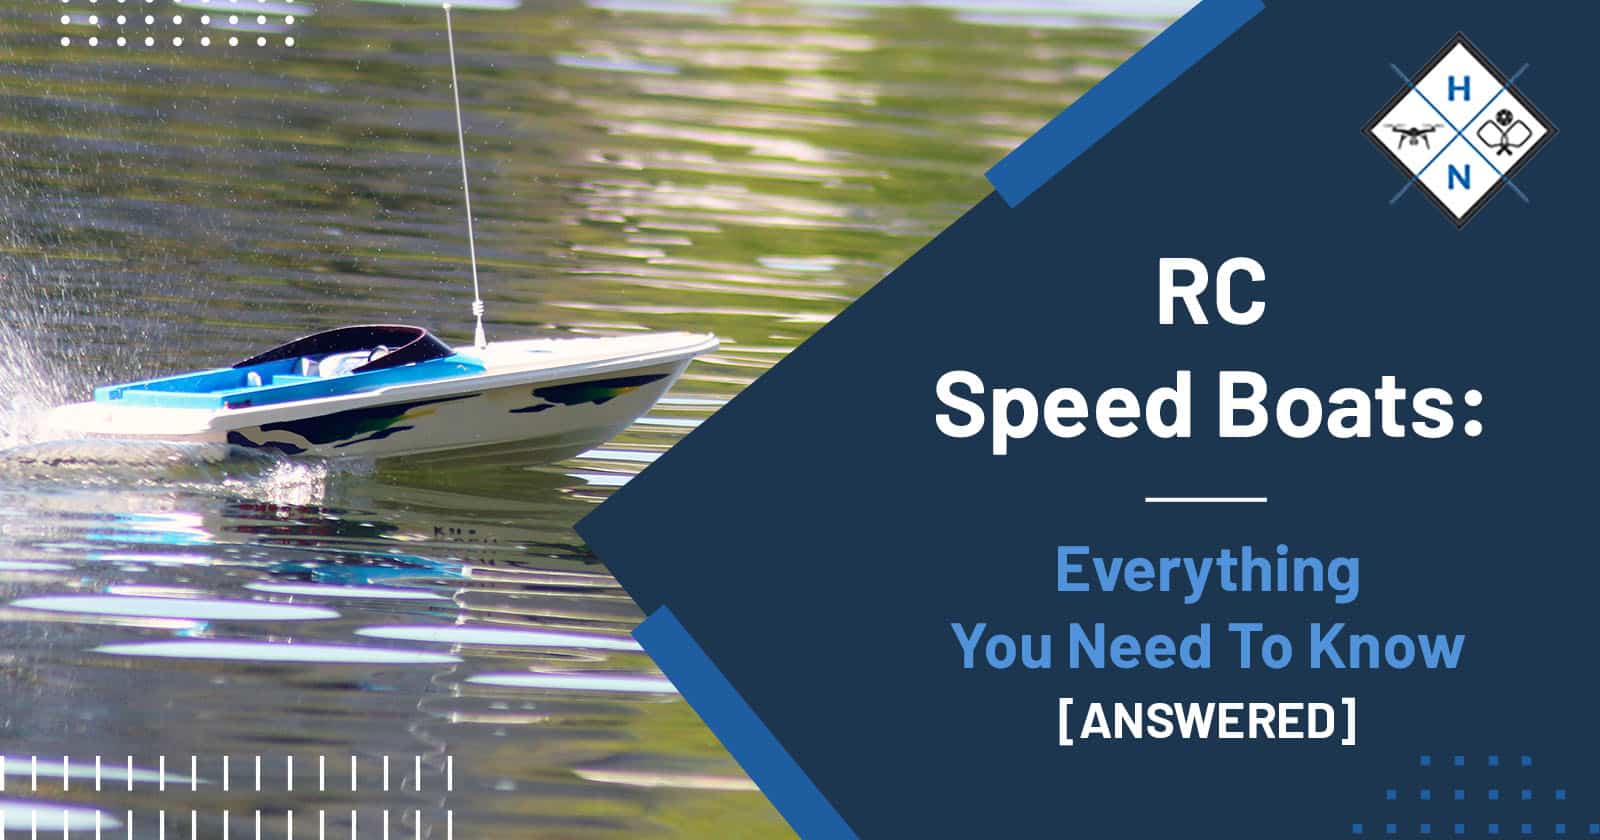 rc speed boats